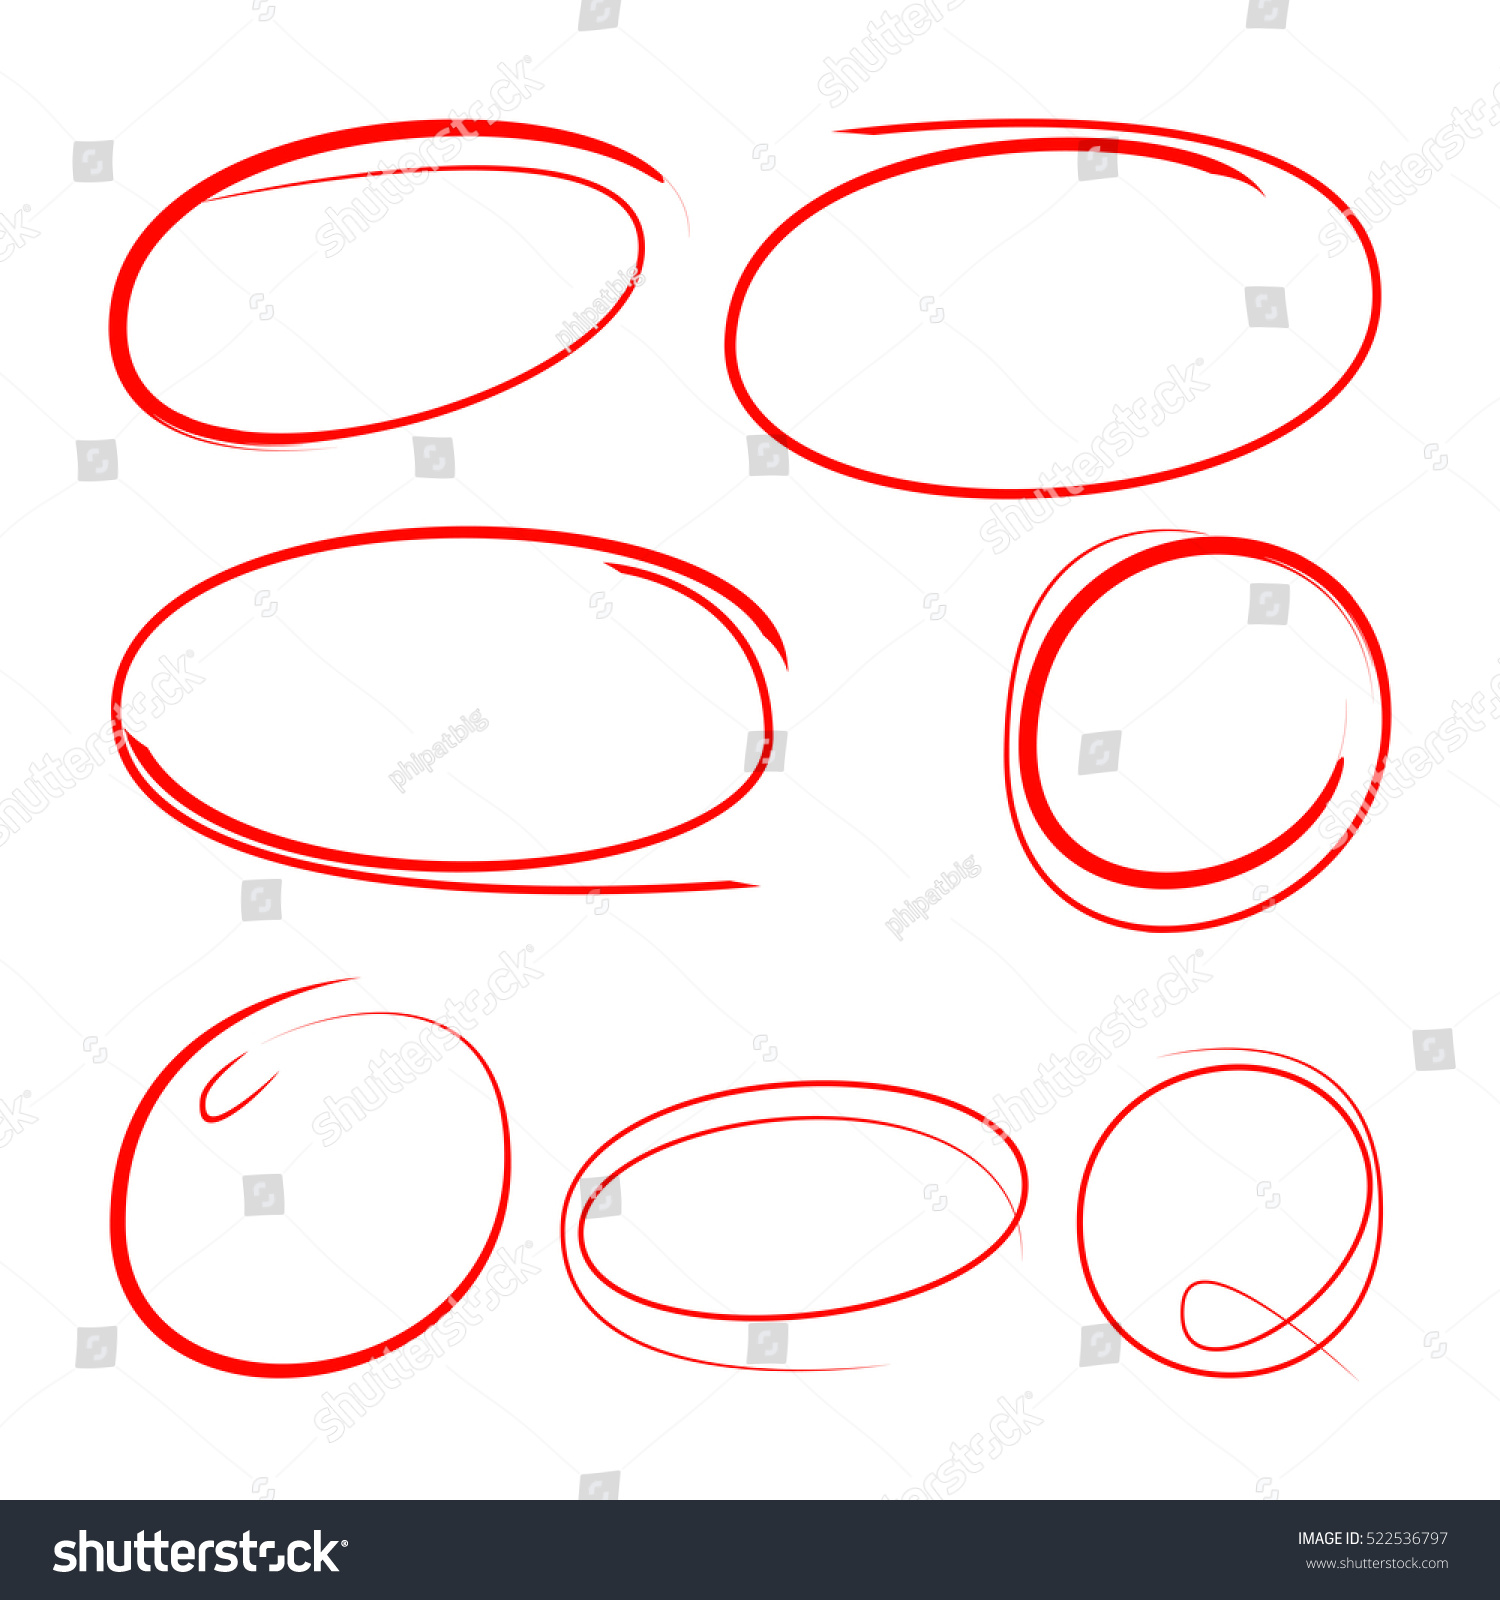 Red Hand Drawn Circle Highlighting Text Stock Vector 522536797